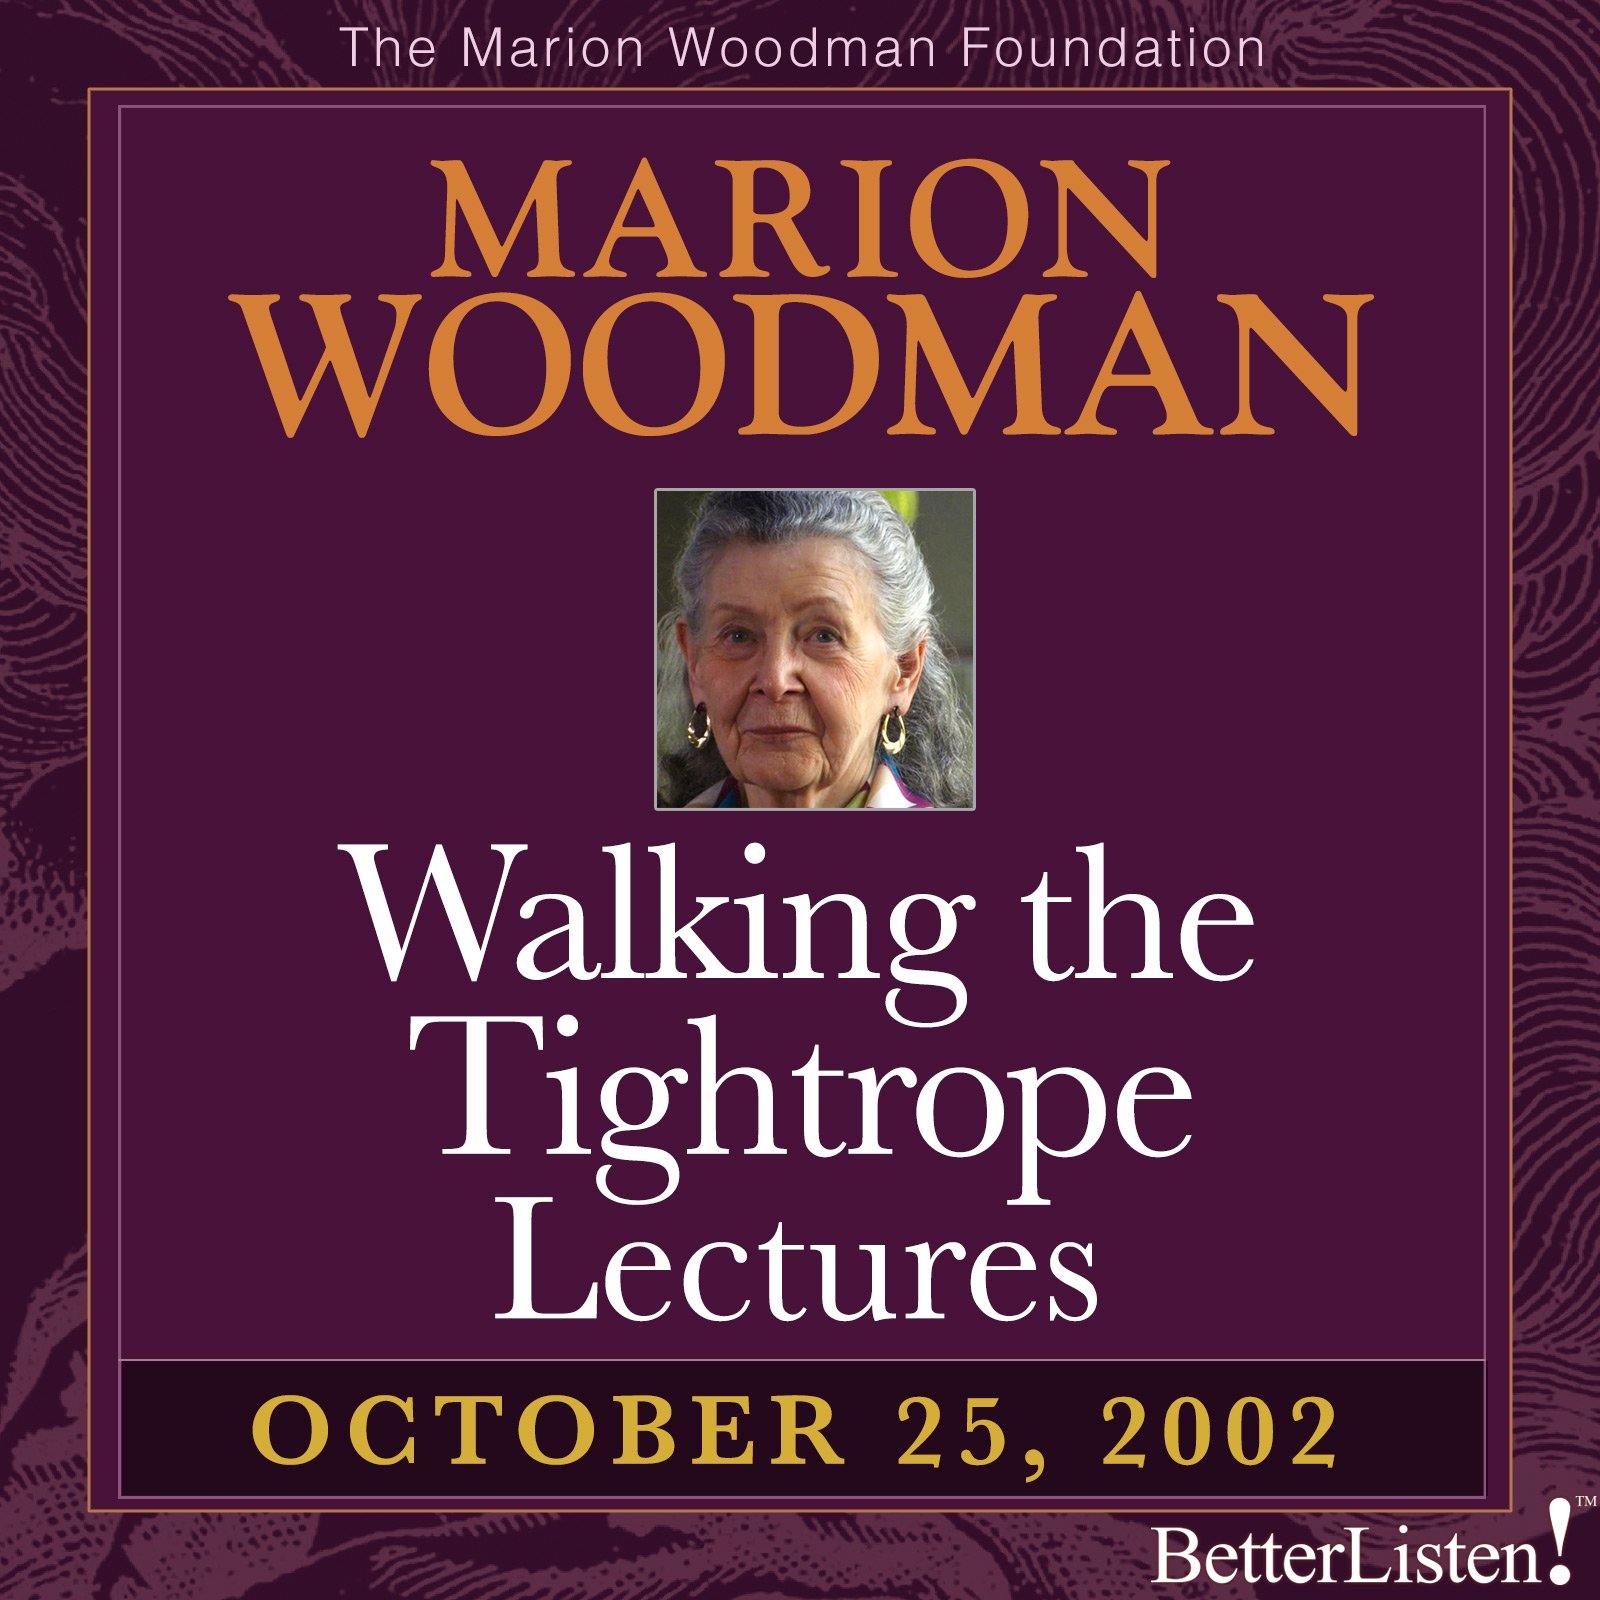 Walking the Tightrope Lectures Marion Woodman #1 - 10-25-02 - BetterListen!